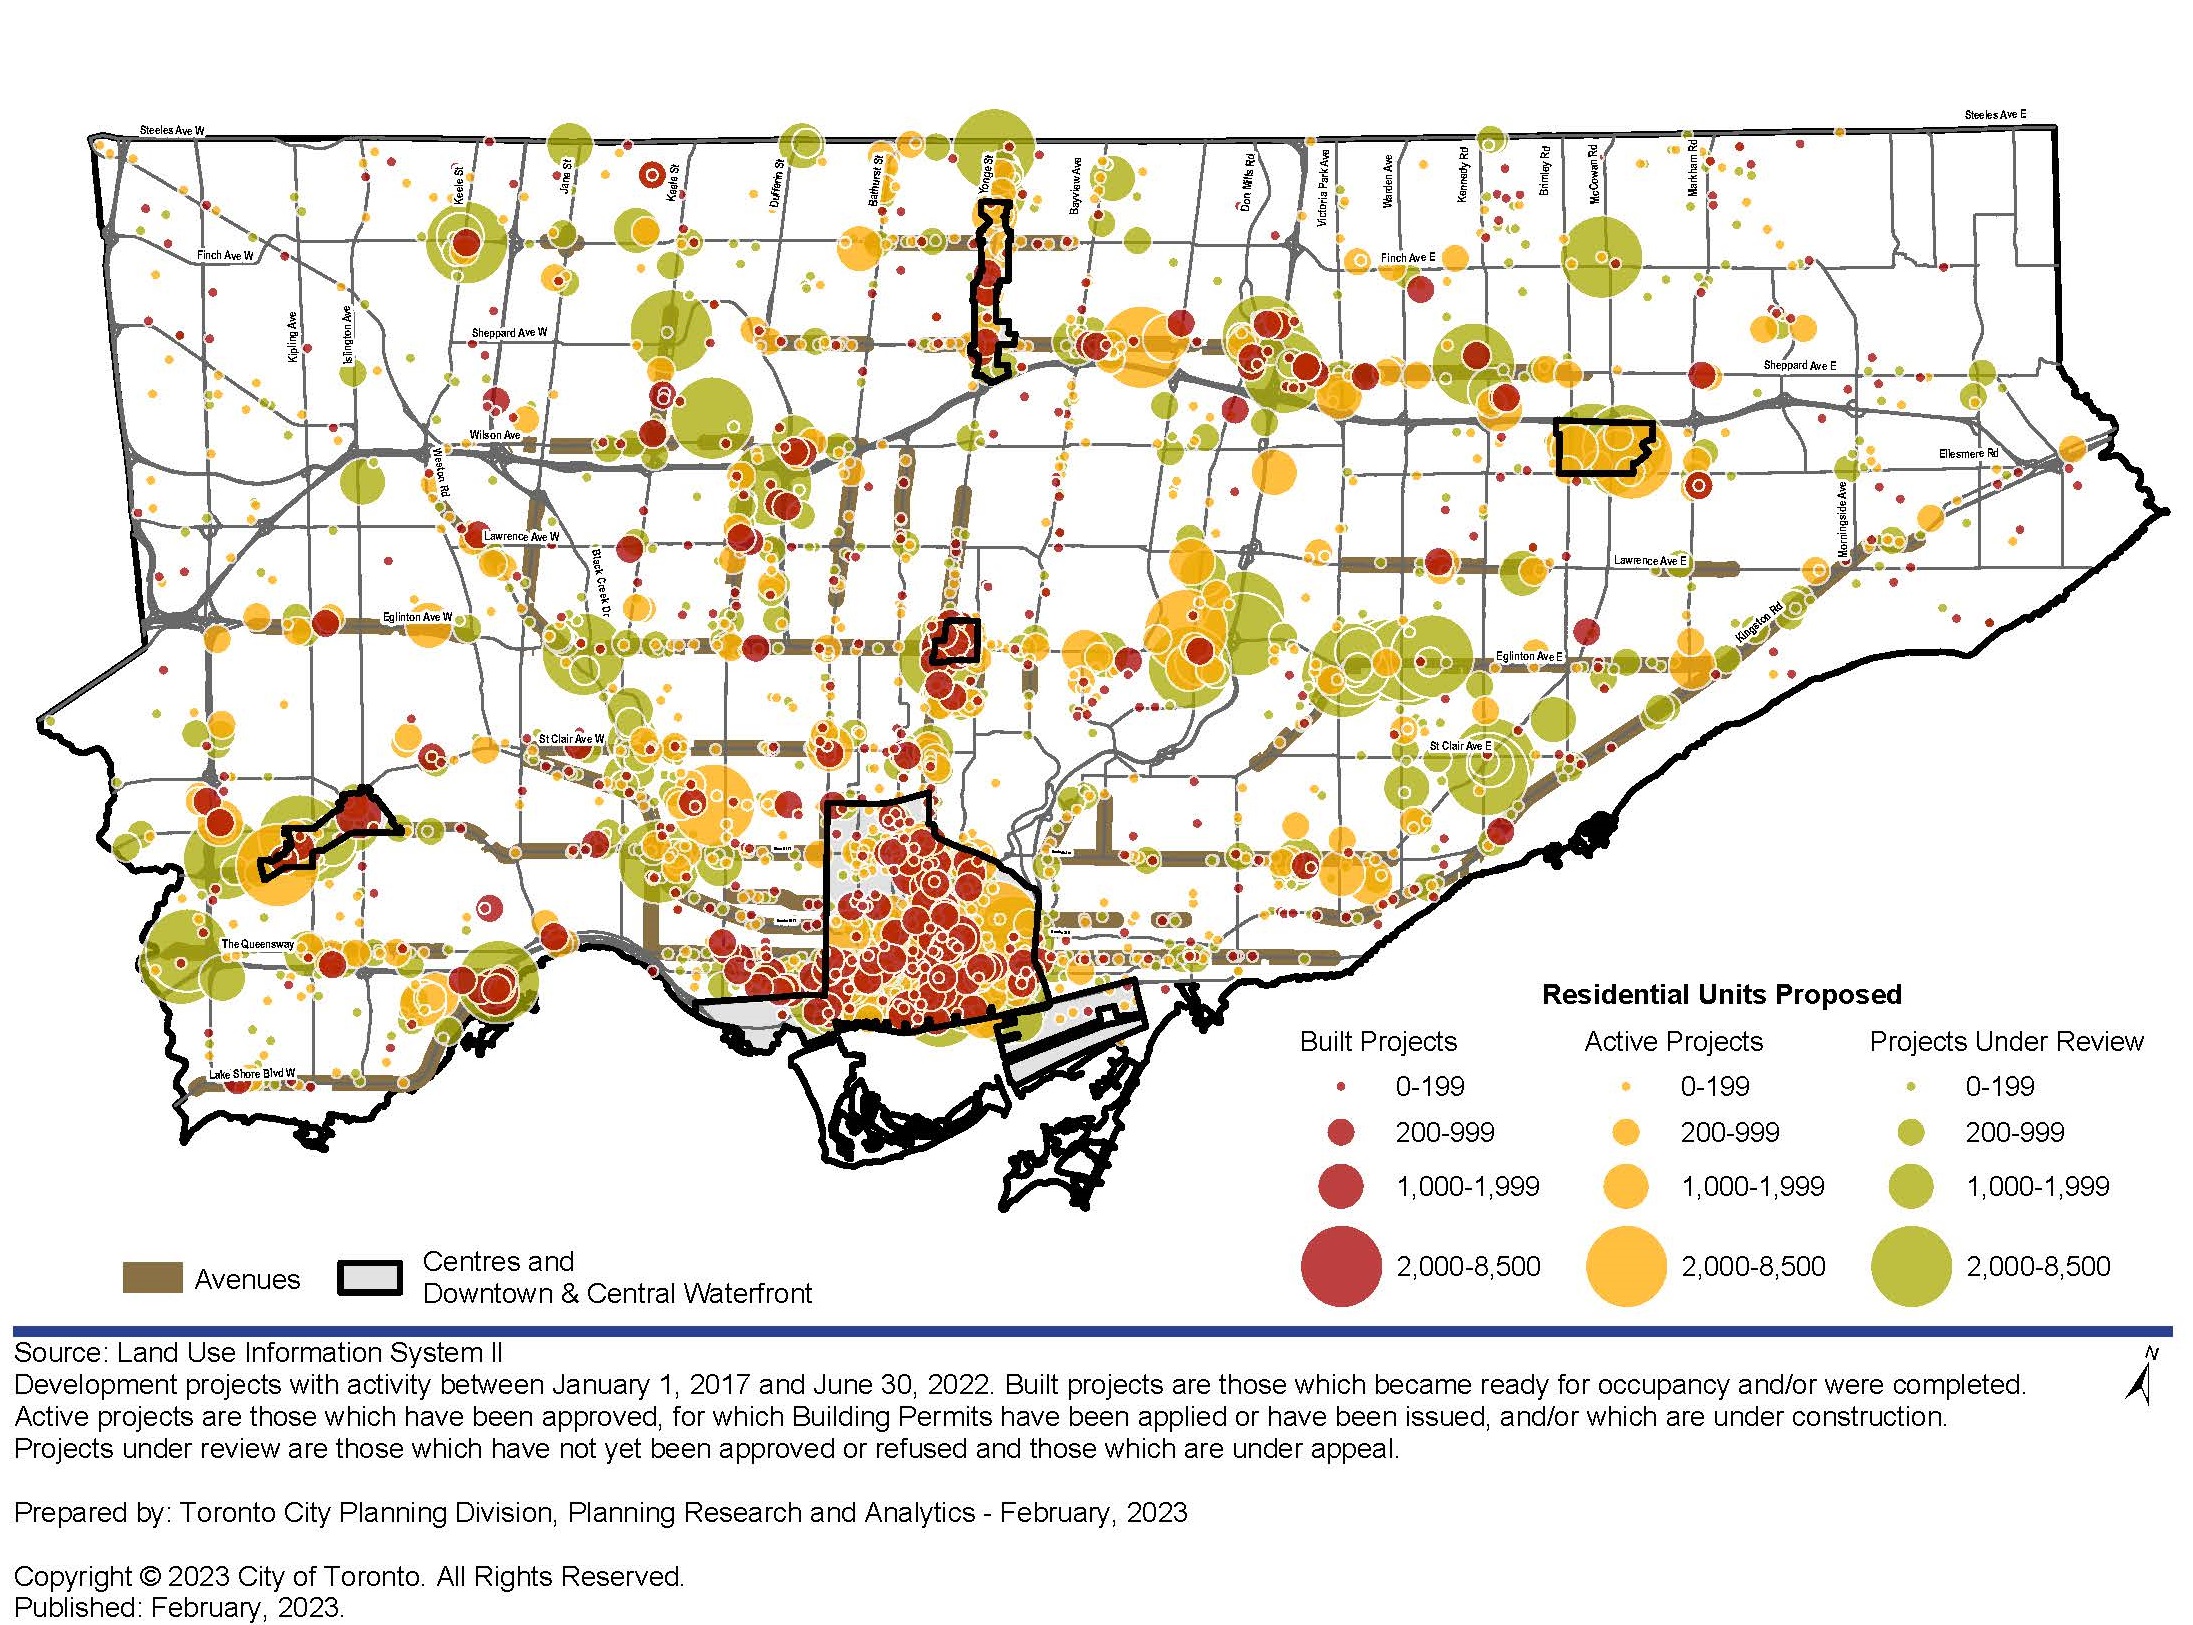 This map shows residential projects as graduated dots with their size based on the number of units they contain. Residential projects in all statuses are concentrated in Downtown, the Centres and along the Avenues throughout the city. For more information, contact Hailey Toft at 416-392-9787 or hailey.toft@toronto.ca.